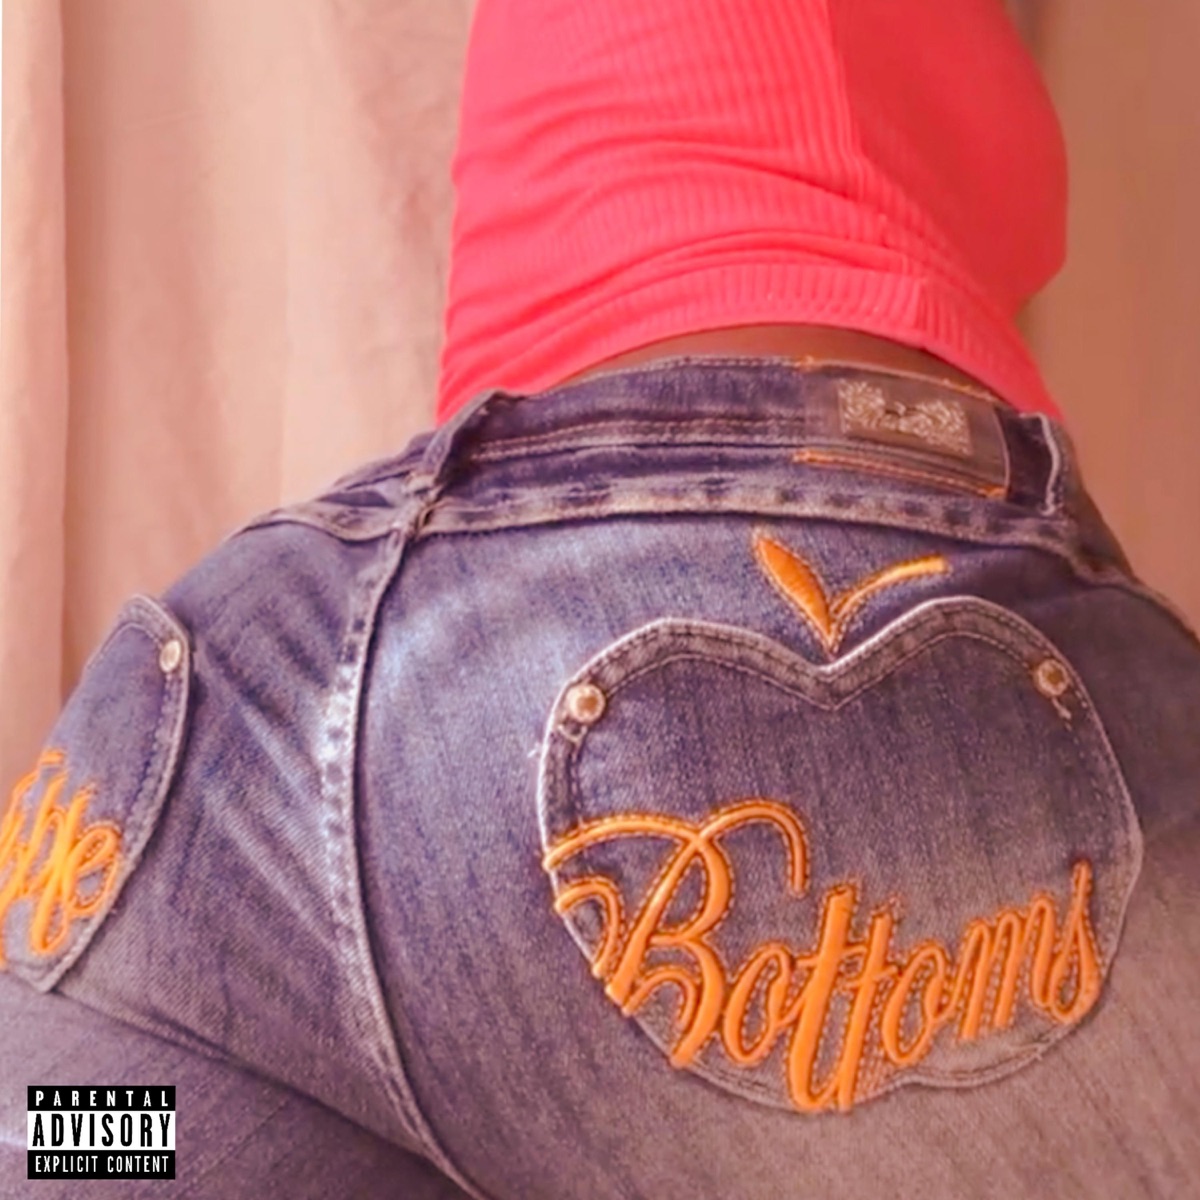 carol nealis recommends apple bottom jeans music pic